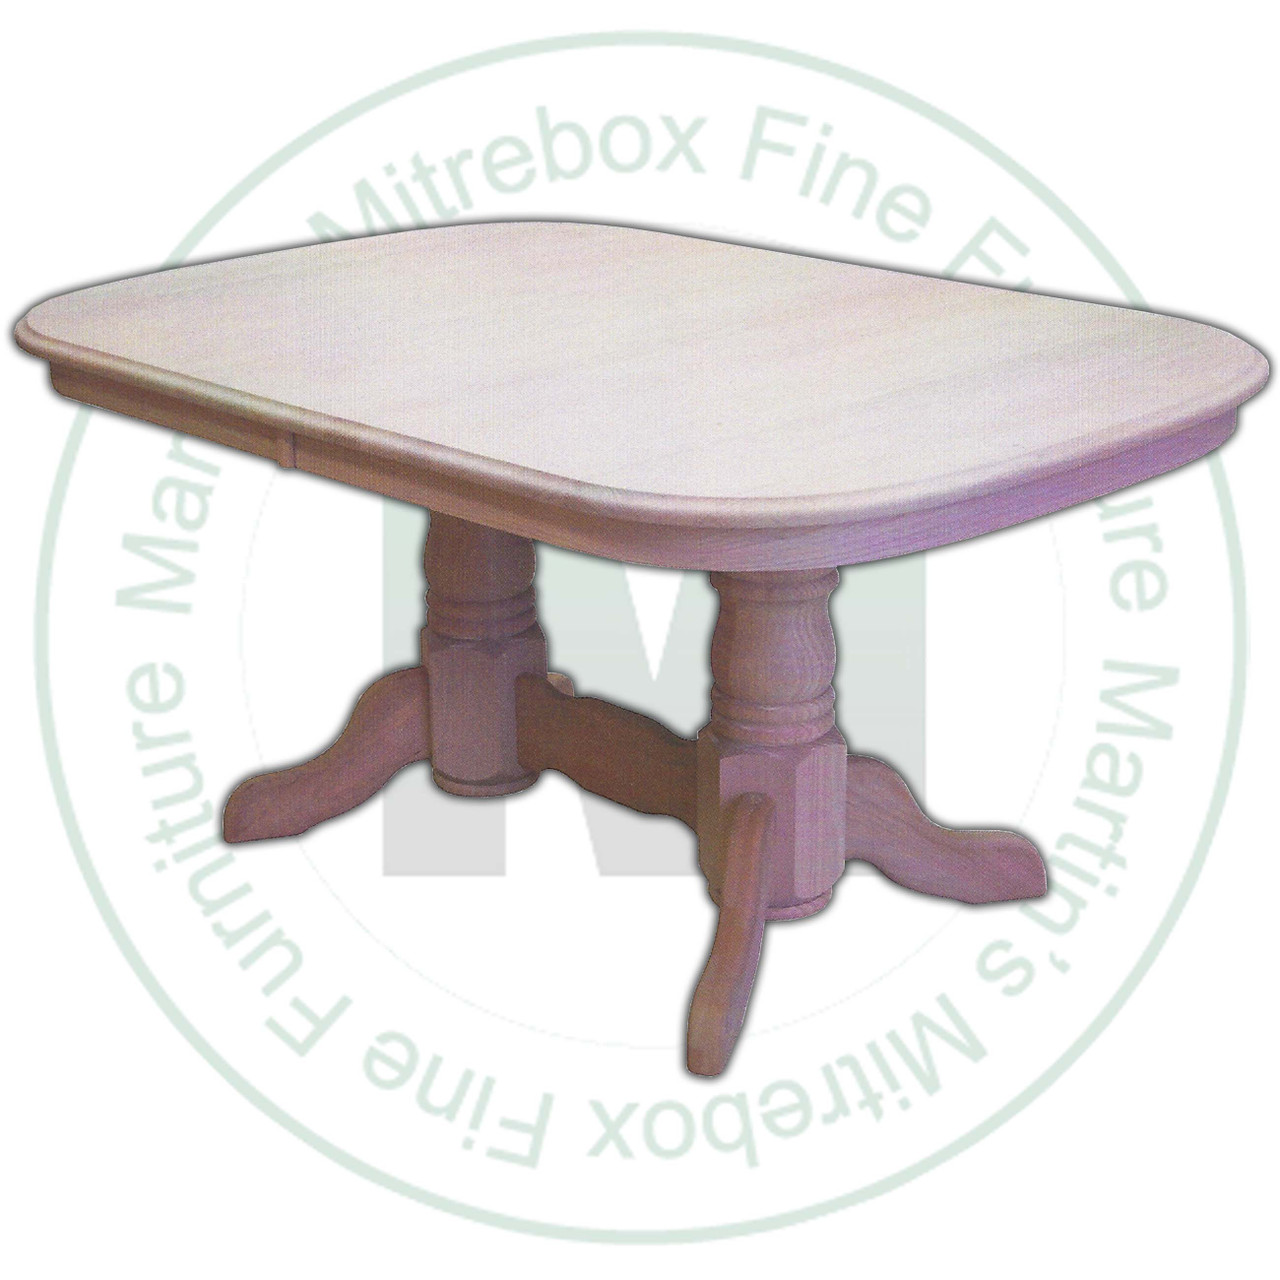 Maple Pennsylvania Solid Top Double Pedestal Table 48''D x 84''W x 30''H. Table Has 1.25'' Thick Top.